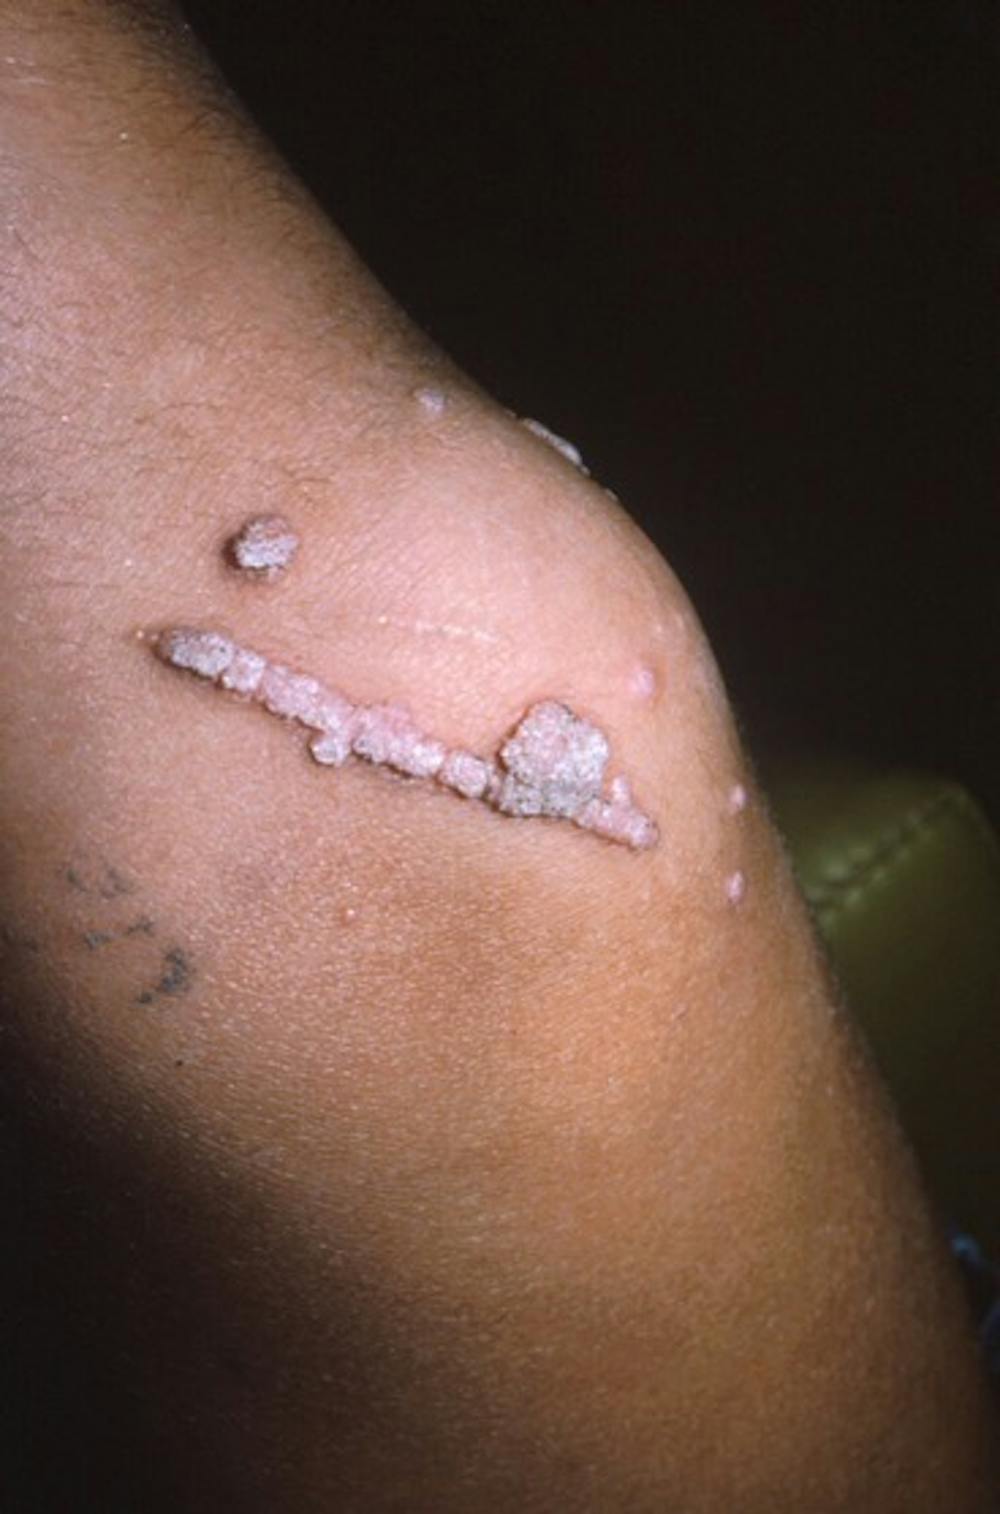 Hpv warts elbow. Hpv warts signs and symptoms, Wart treatment elbow